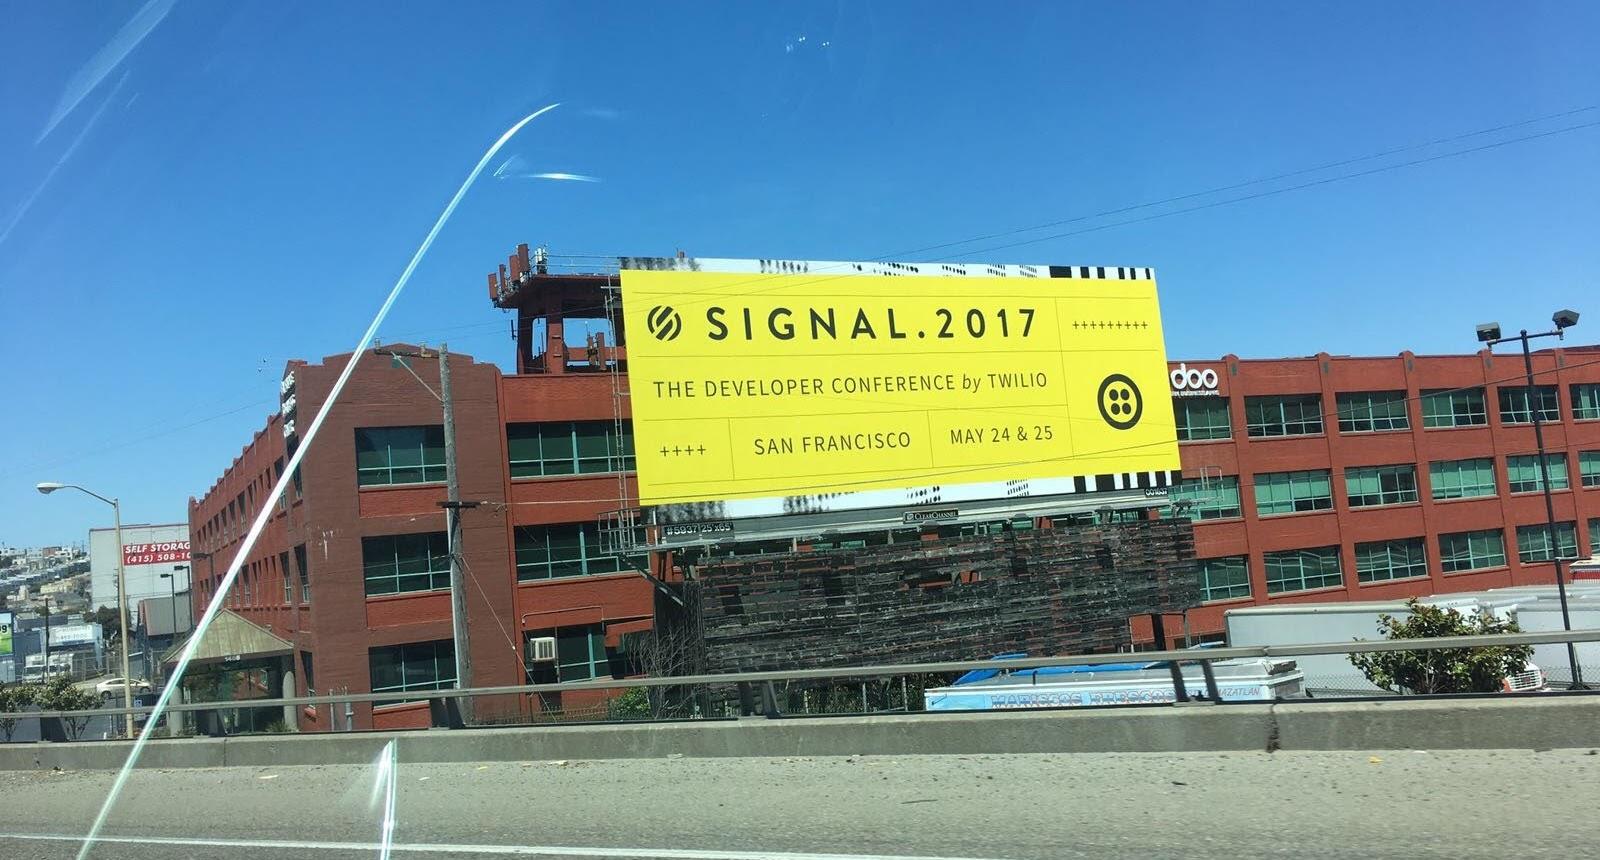 SIGNAL conference 2017